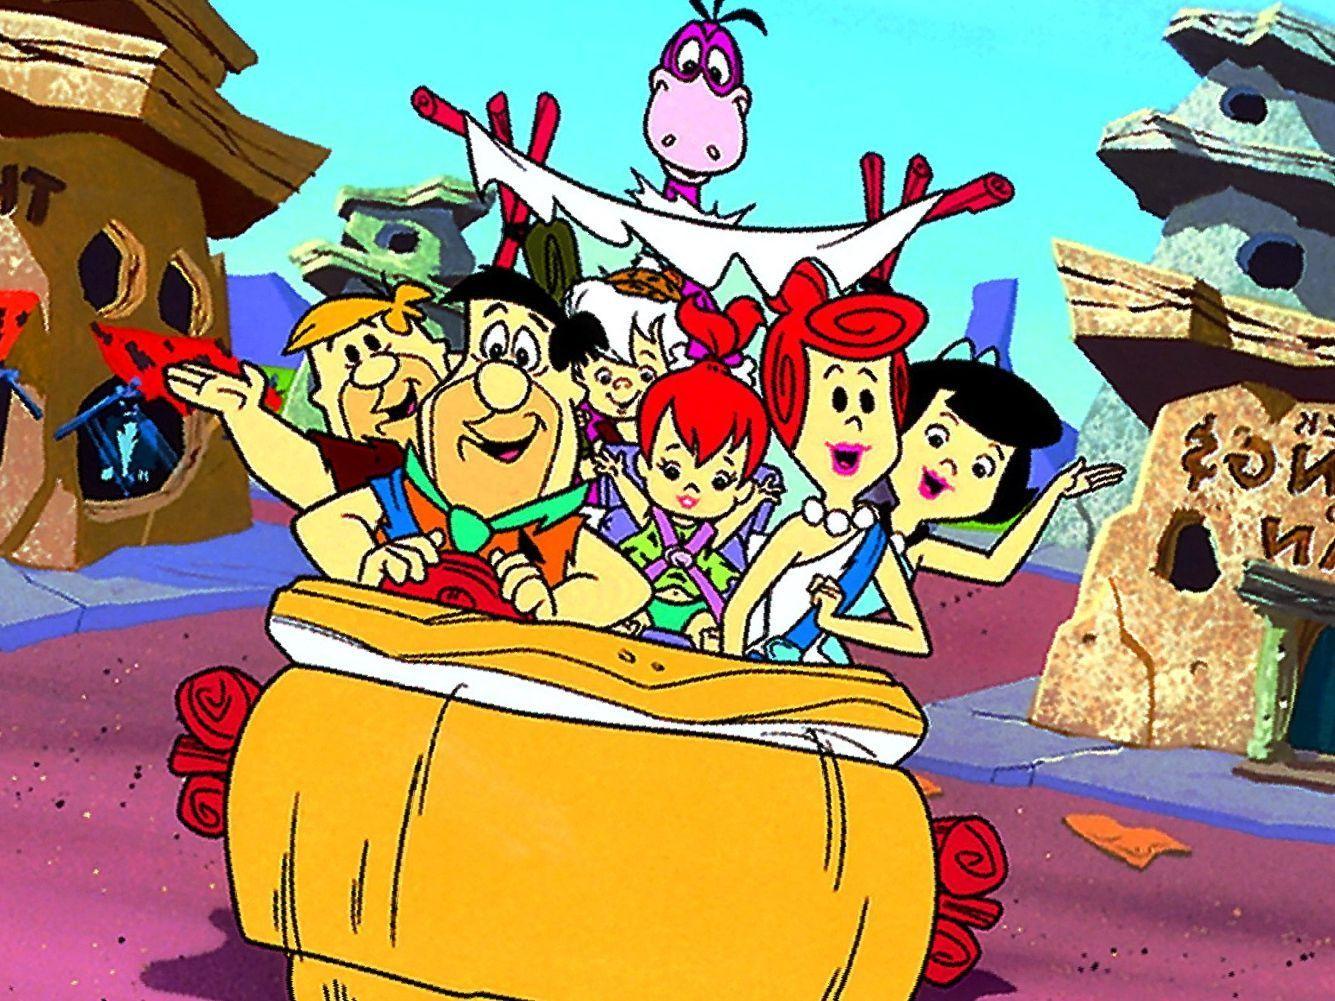 Flintstone wallpaper and image, picture, photo